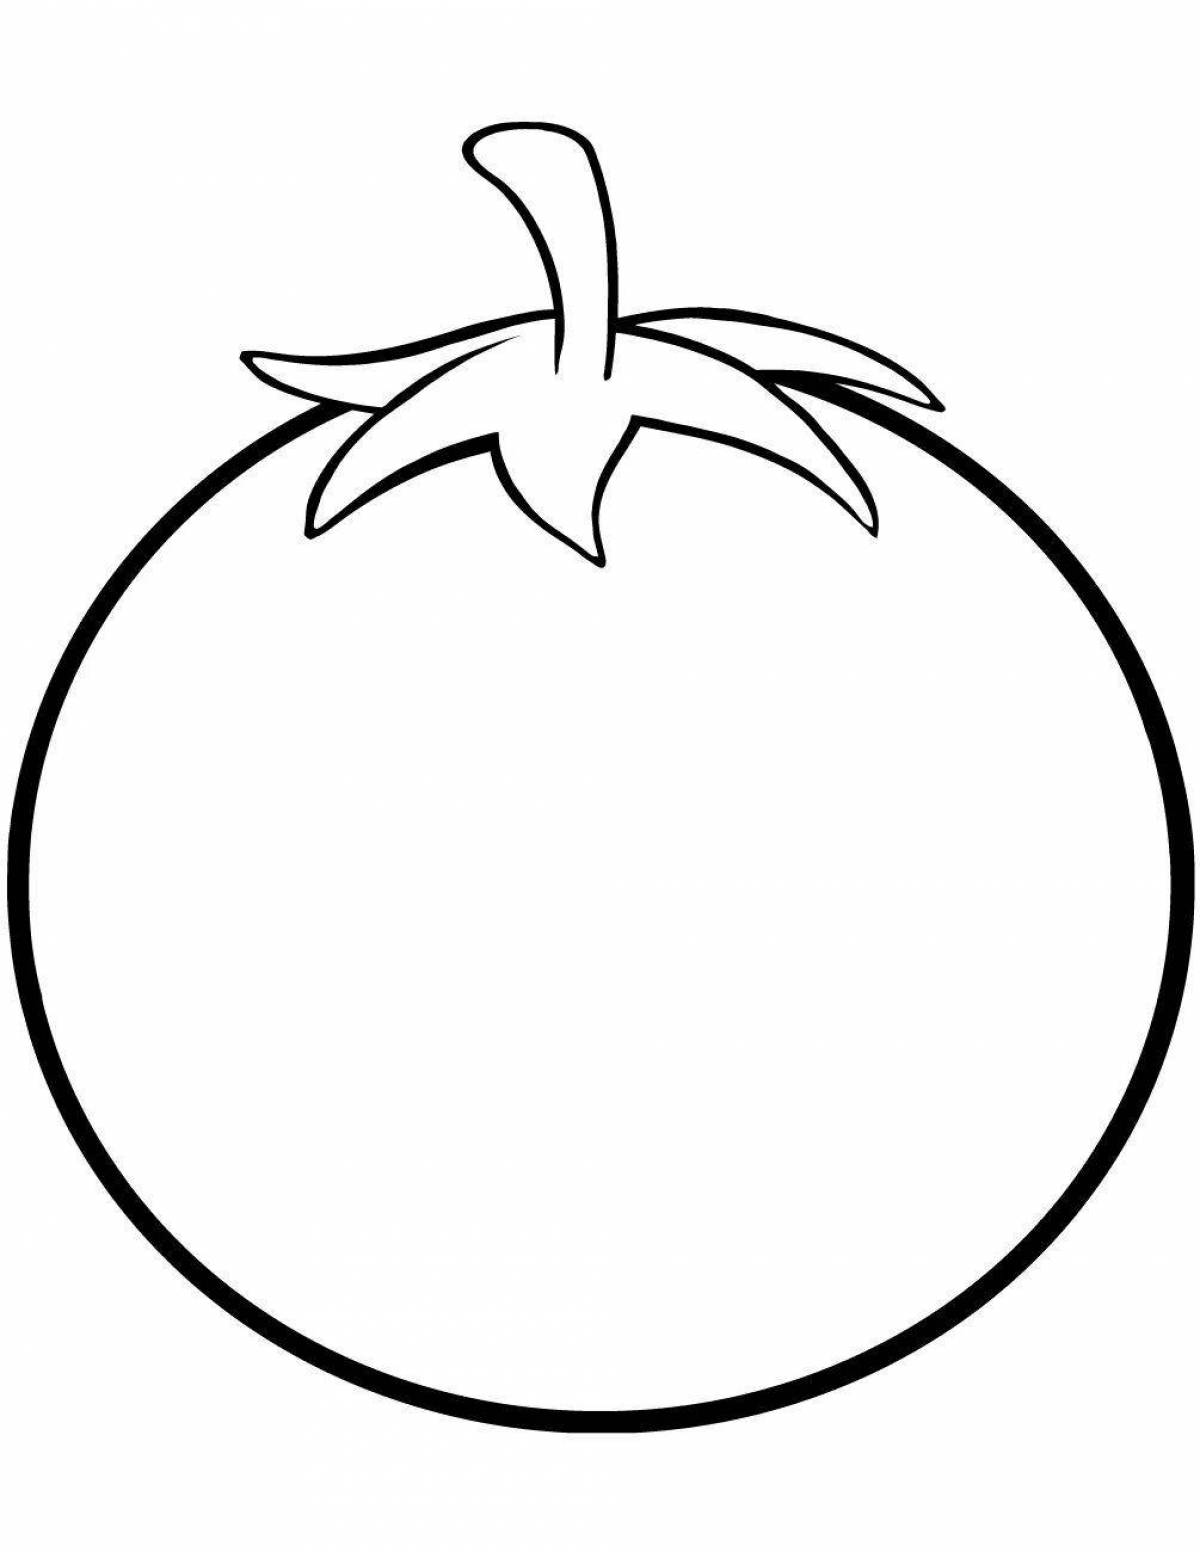 Coloring pages with lush tomatoes for children 2-3 years old